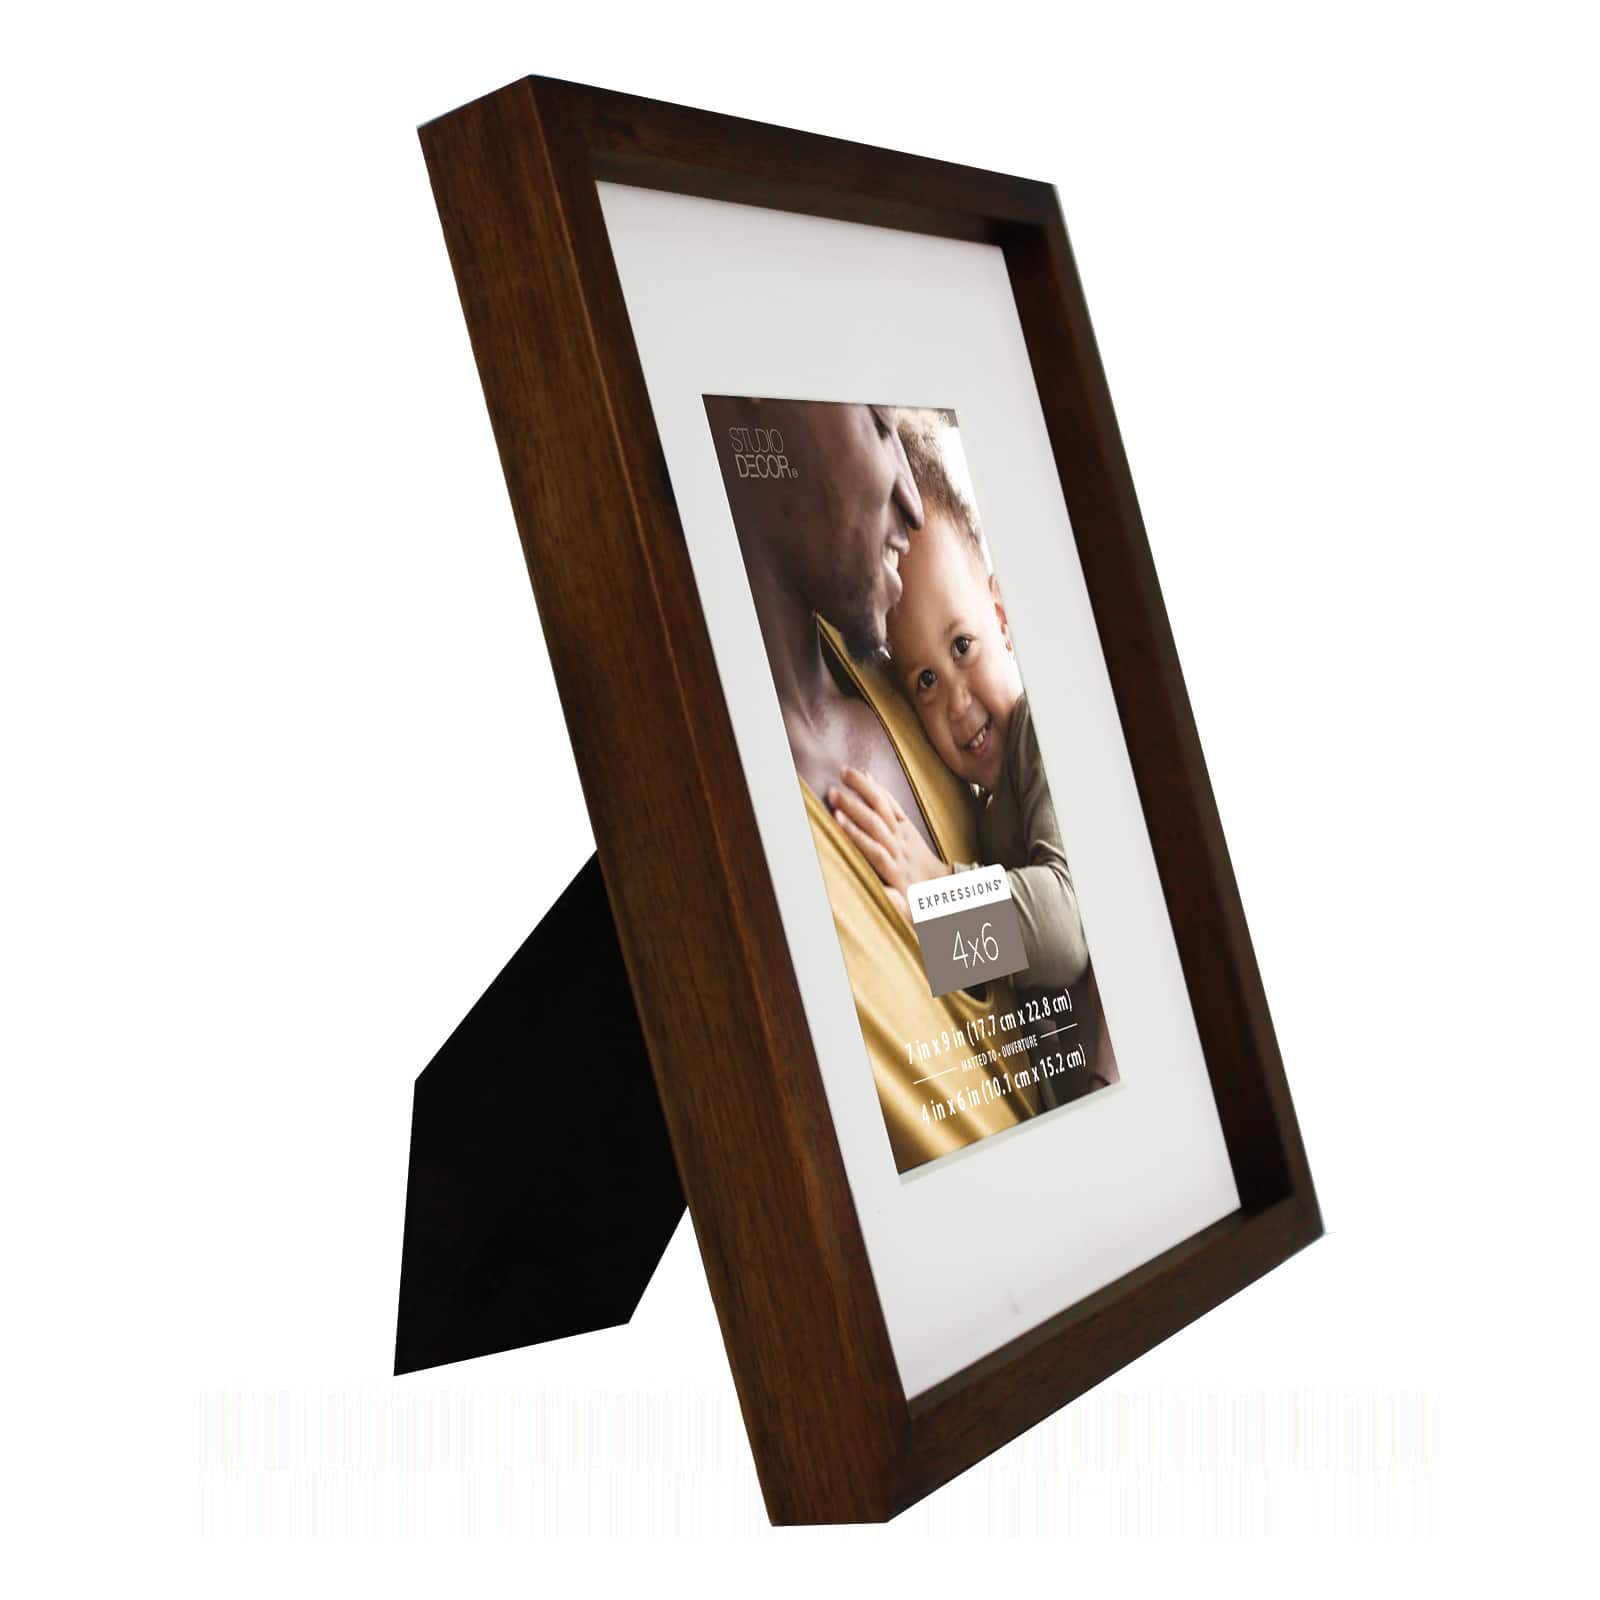 MAMMOTH PICTURE FRAME 4X6